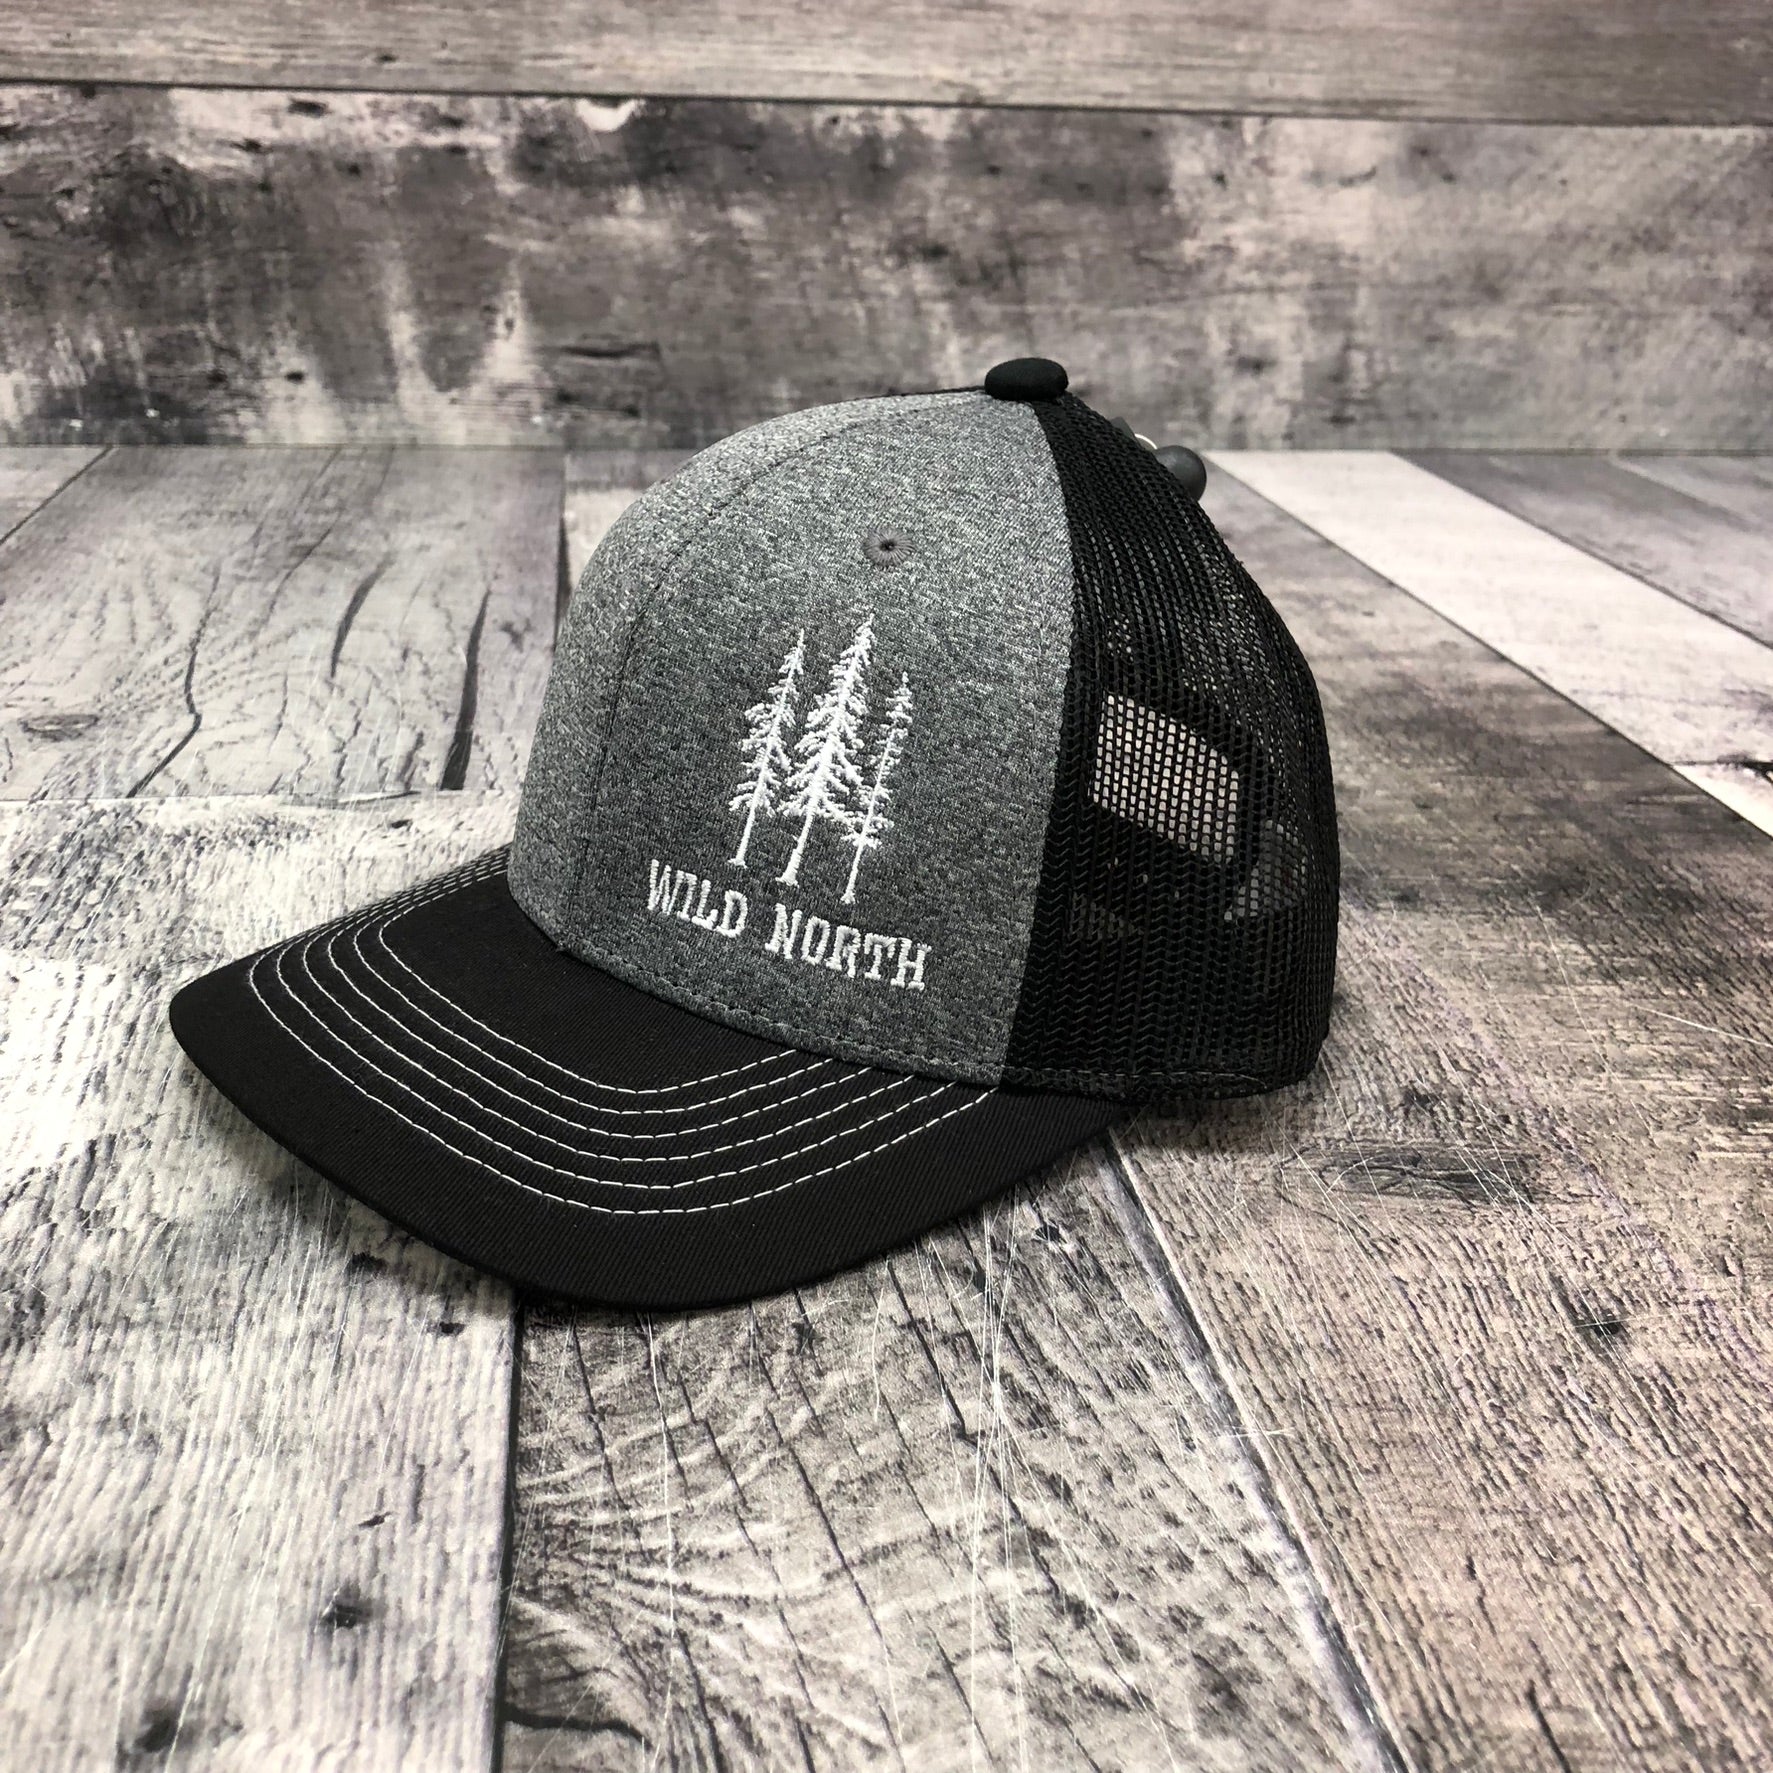 Wild North Mesh Snapback Youth Embroidered Hat - Grey (black)